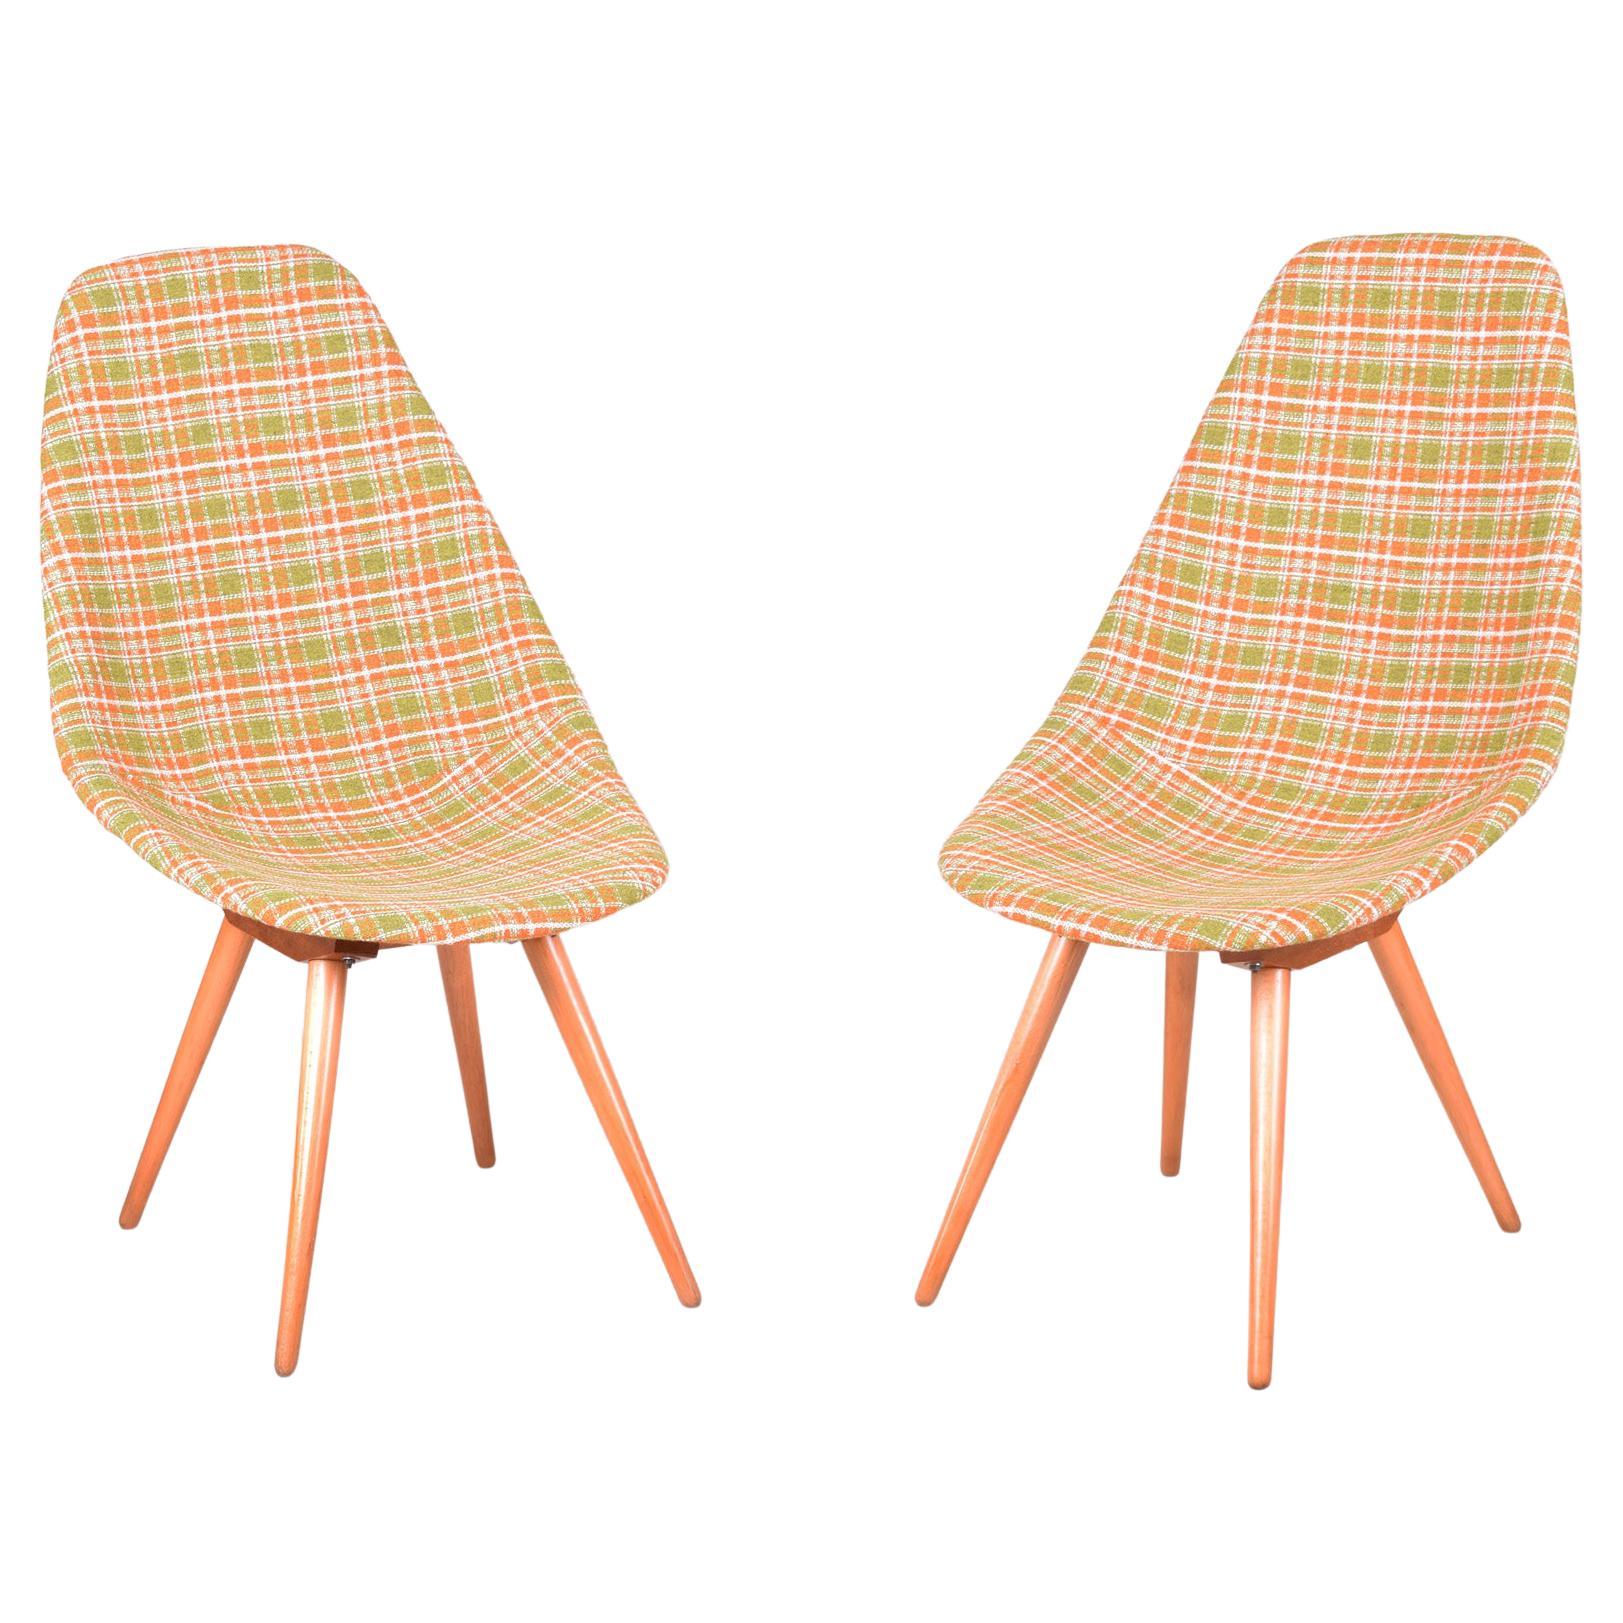 Restored Pair of Czech Midcentury Chairs, 1950-1960, Made Out of Beech & Fabric